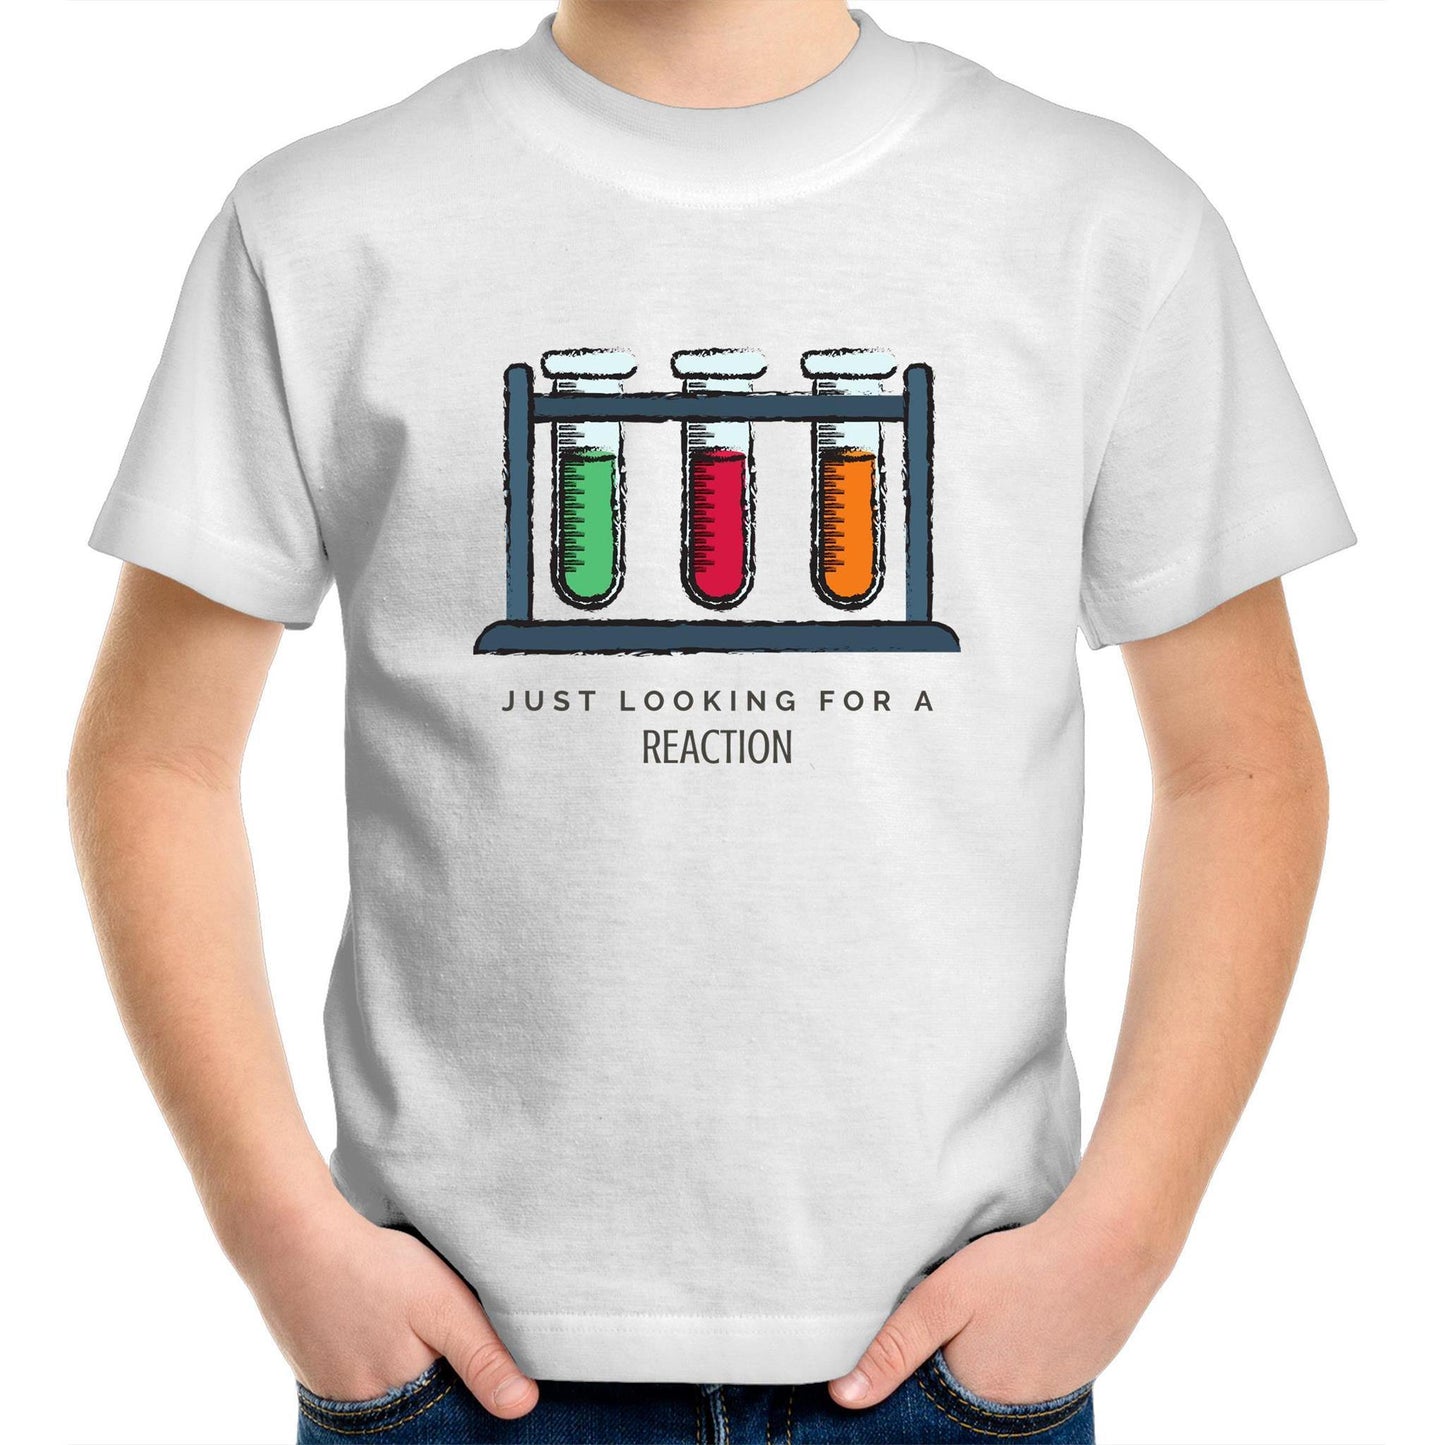 Test Tube, Just Looking For A Reaction - Kids Youth Crew T-Shirt White Kids Youth T-shirt Science